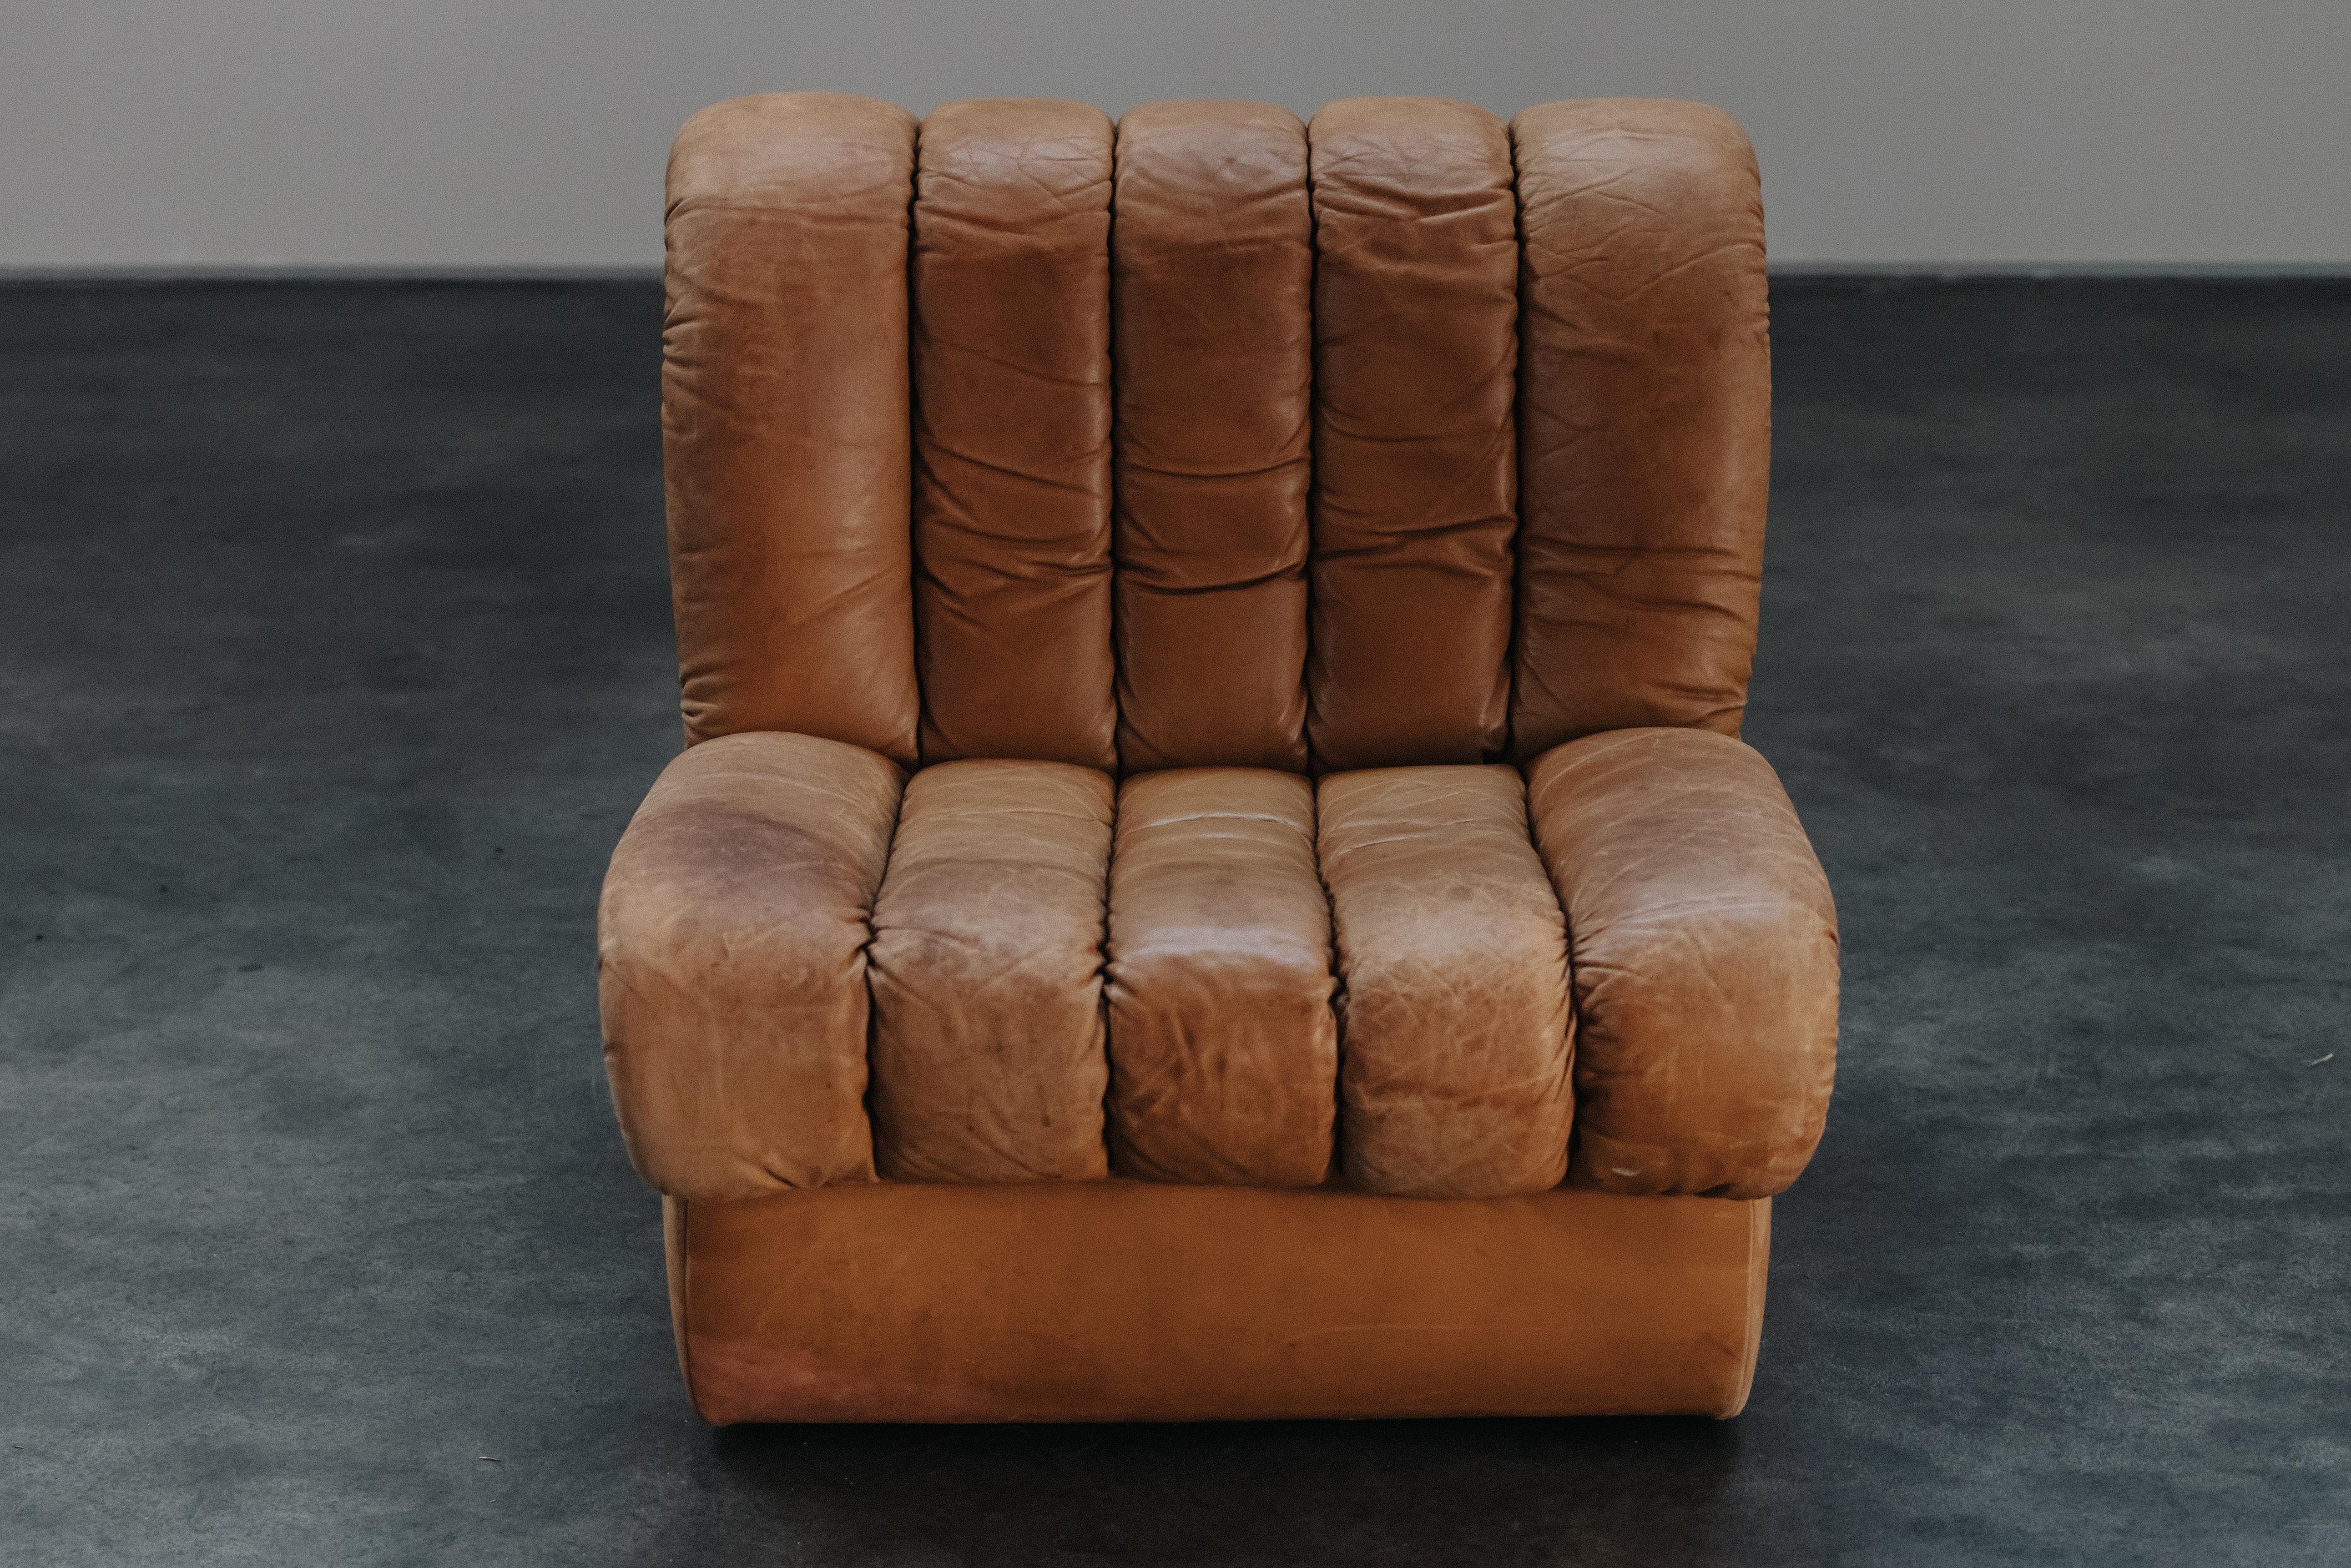 Vintage De Sede DS85 Lounge Chair From Switzerland, Circa 1970.  Original cognac leather upholstery with great patina and use.